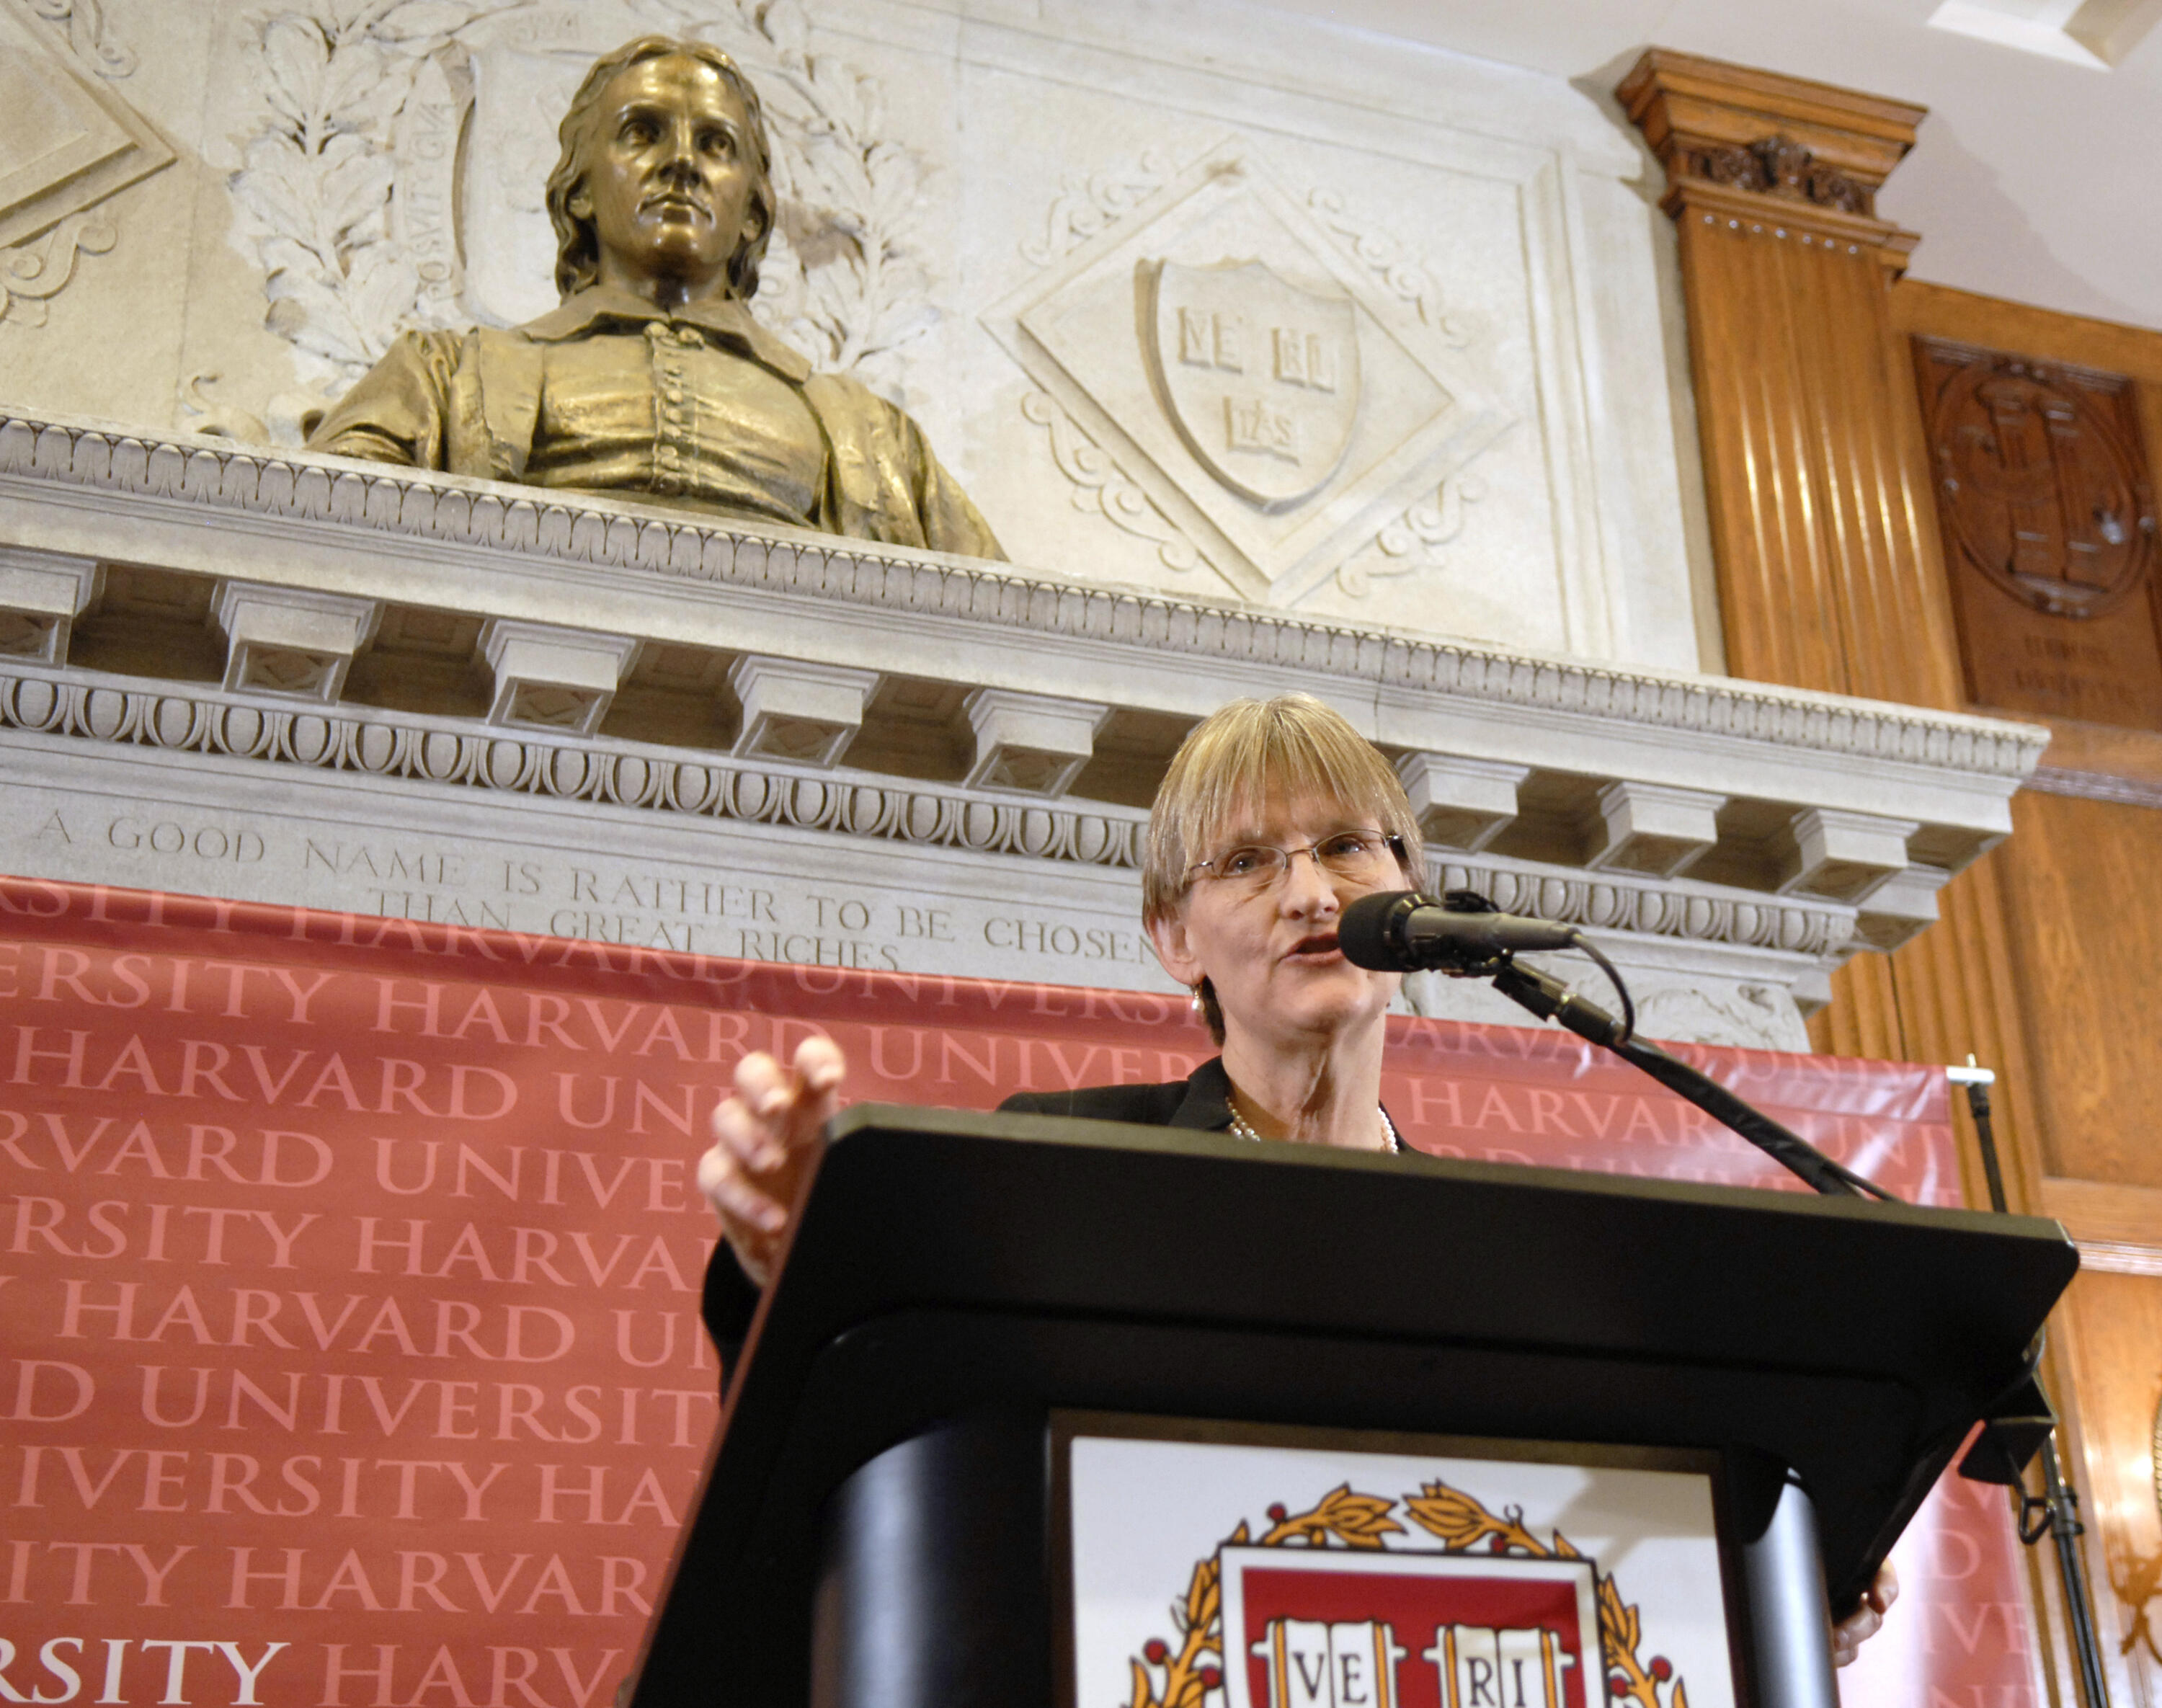 CAMBRIDGE, MA - FEBRUARY 11:  Historian Drew Gilpin Faust speaks at Harvard University in the Thompson Room of the Barker Center as she is named President of Harvard February 11, 2007 in Cambridge, Massachusetts.  Harvard appointed Faust as the first woma